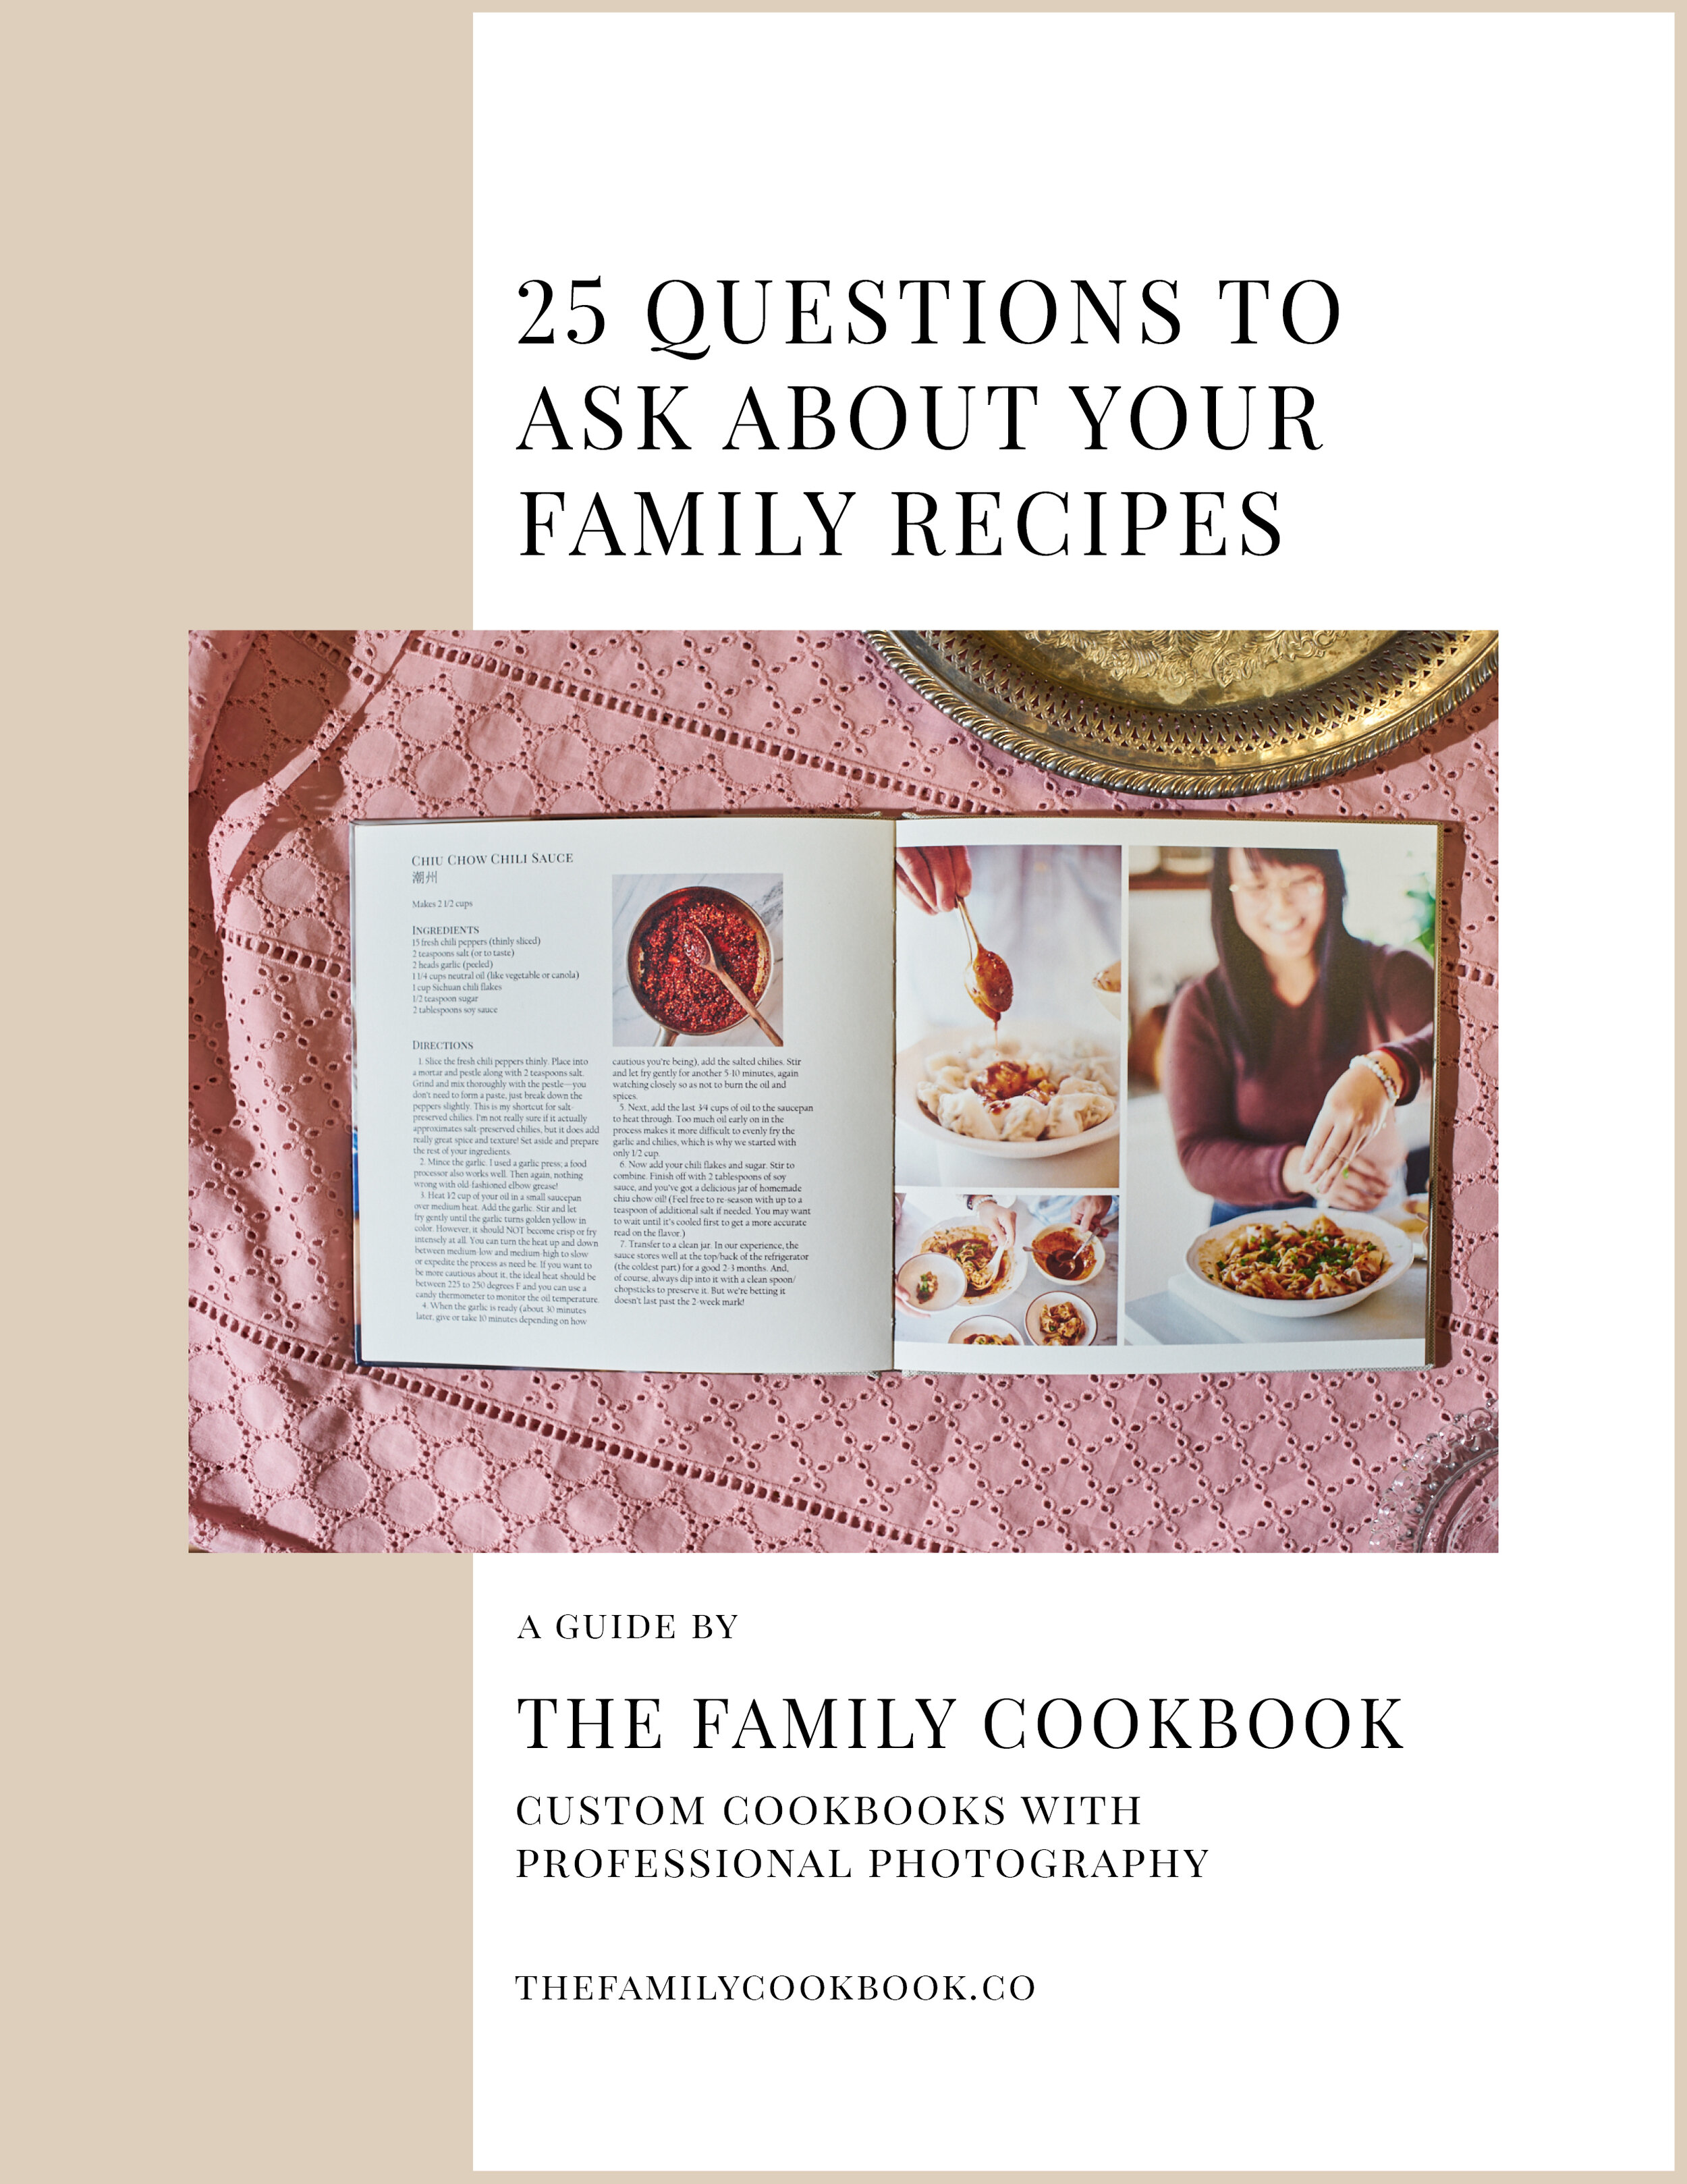 Family Recipes Our Heirloom Family Cookbook (Paperback)